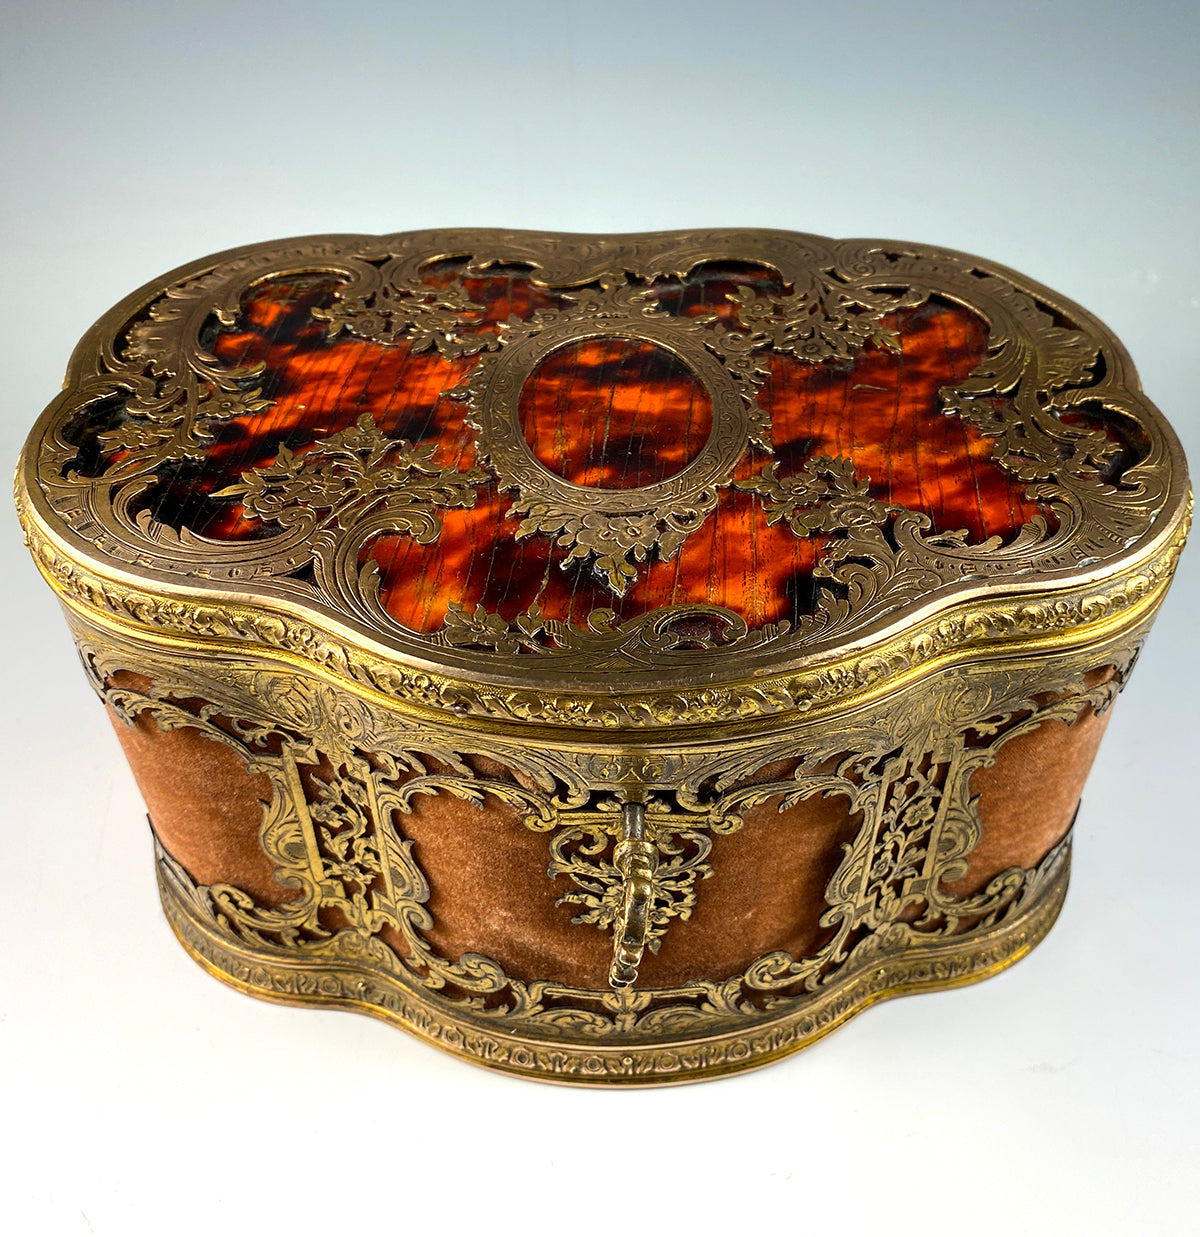 VERY RARE Spectacular c.1830 French Tortoise Shell, Silk, Dore Bronze Chocolatier's Chest, Box, Confectioner's Big Presentation Case, Likely Boissier